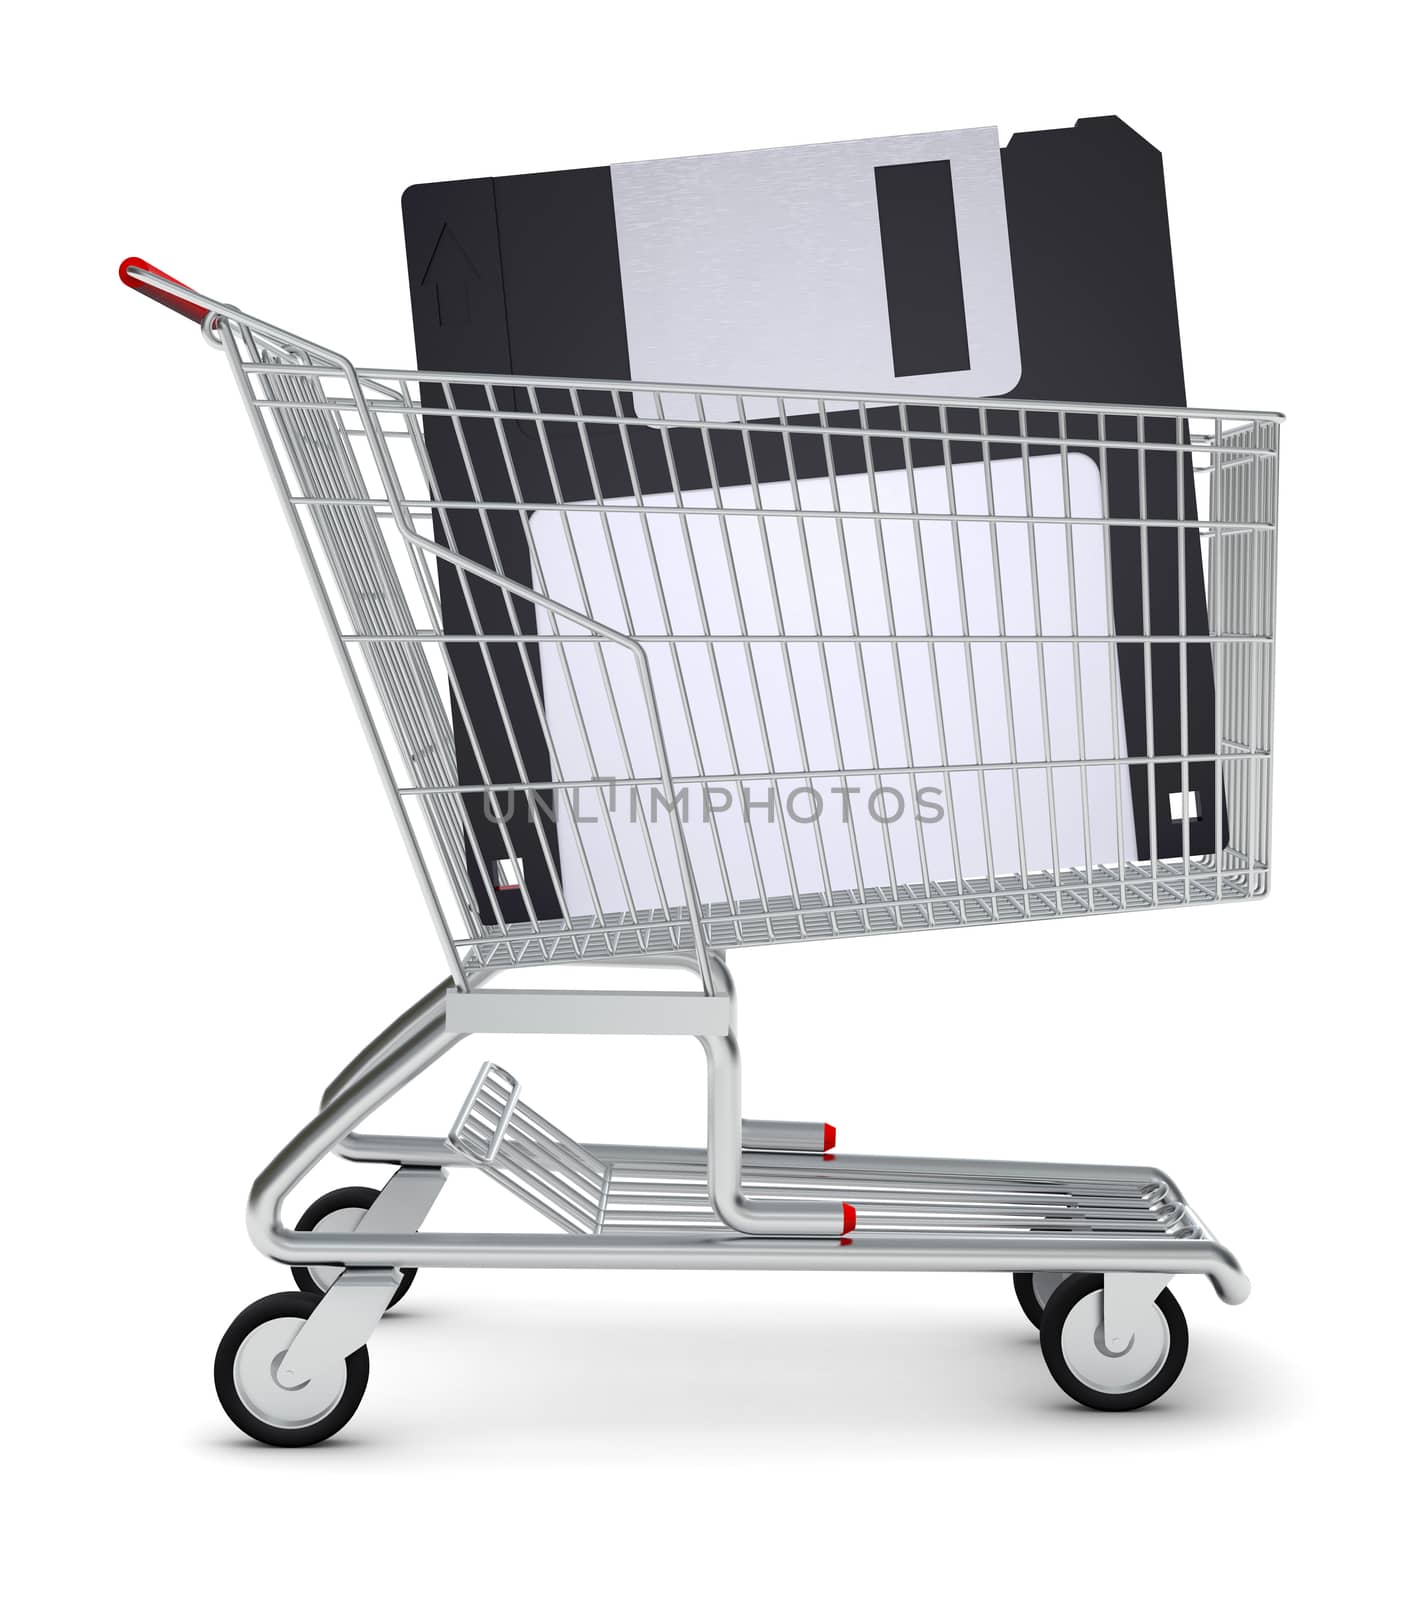 Floppy in shopping cart on isolated white background